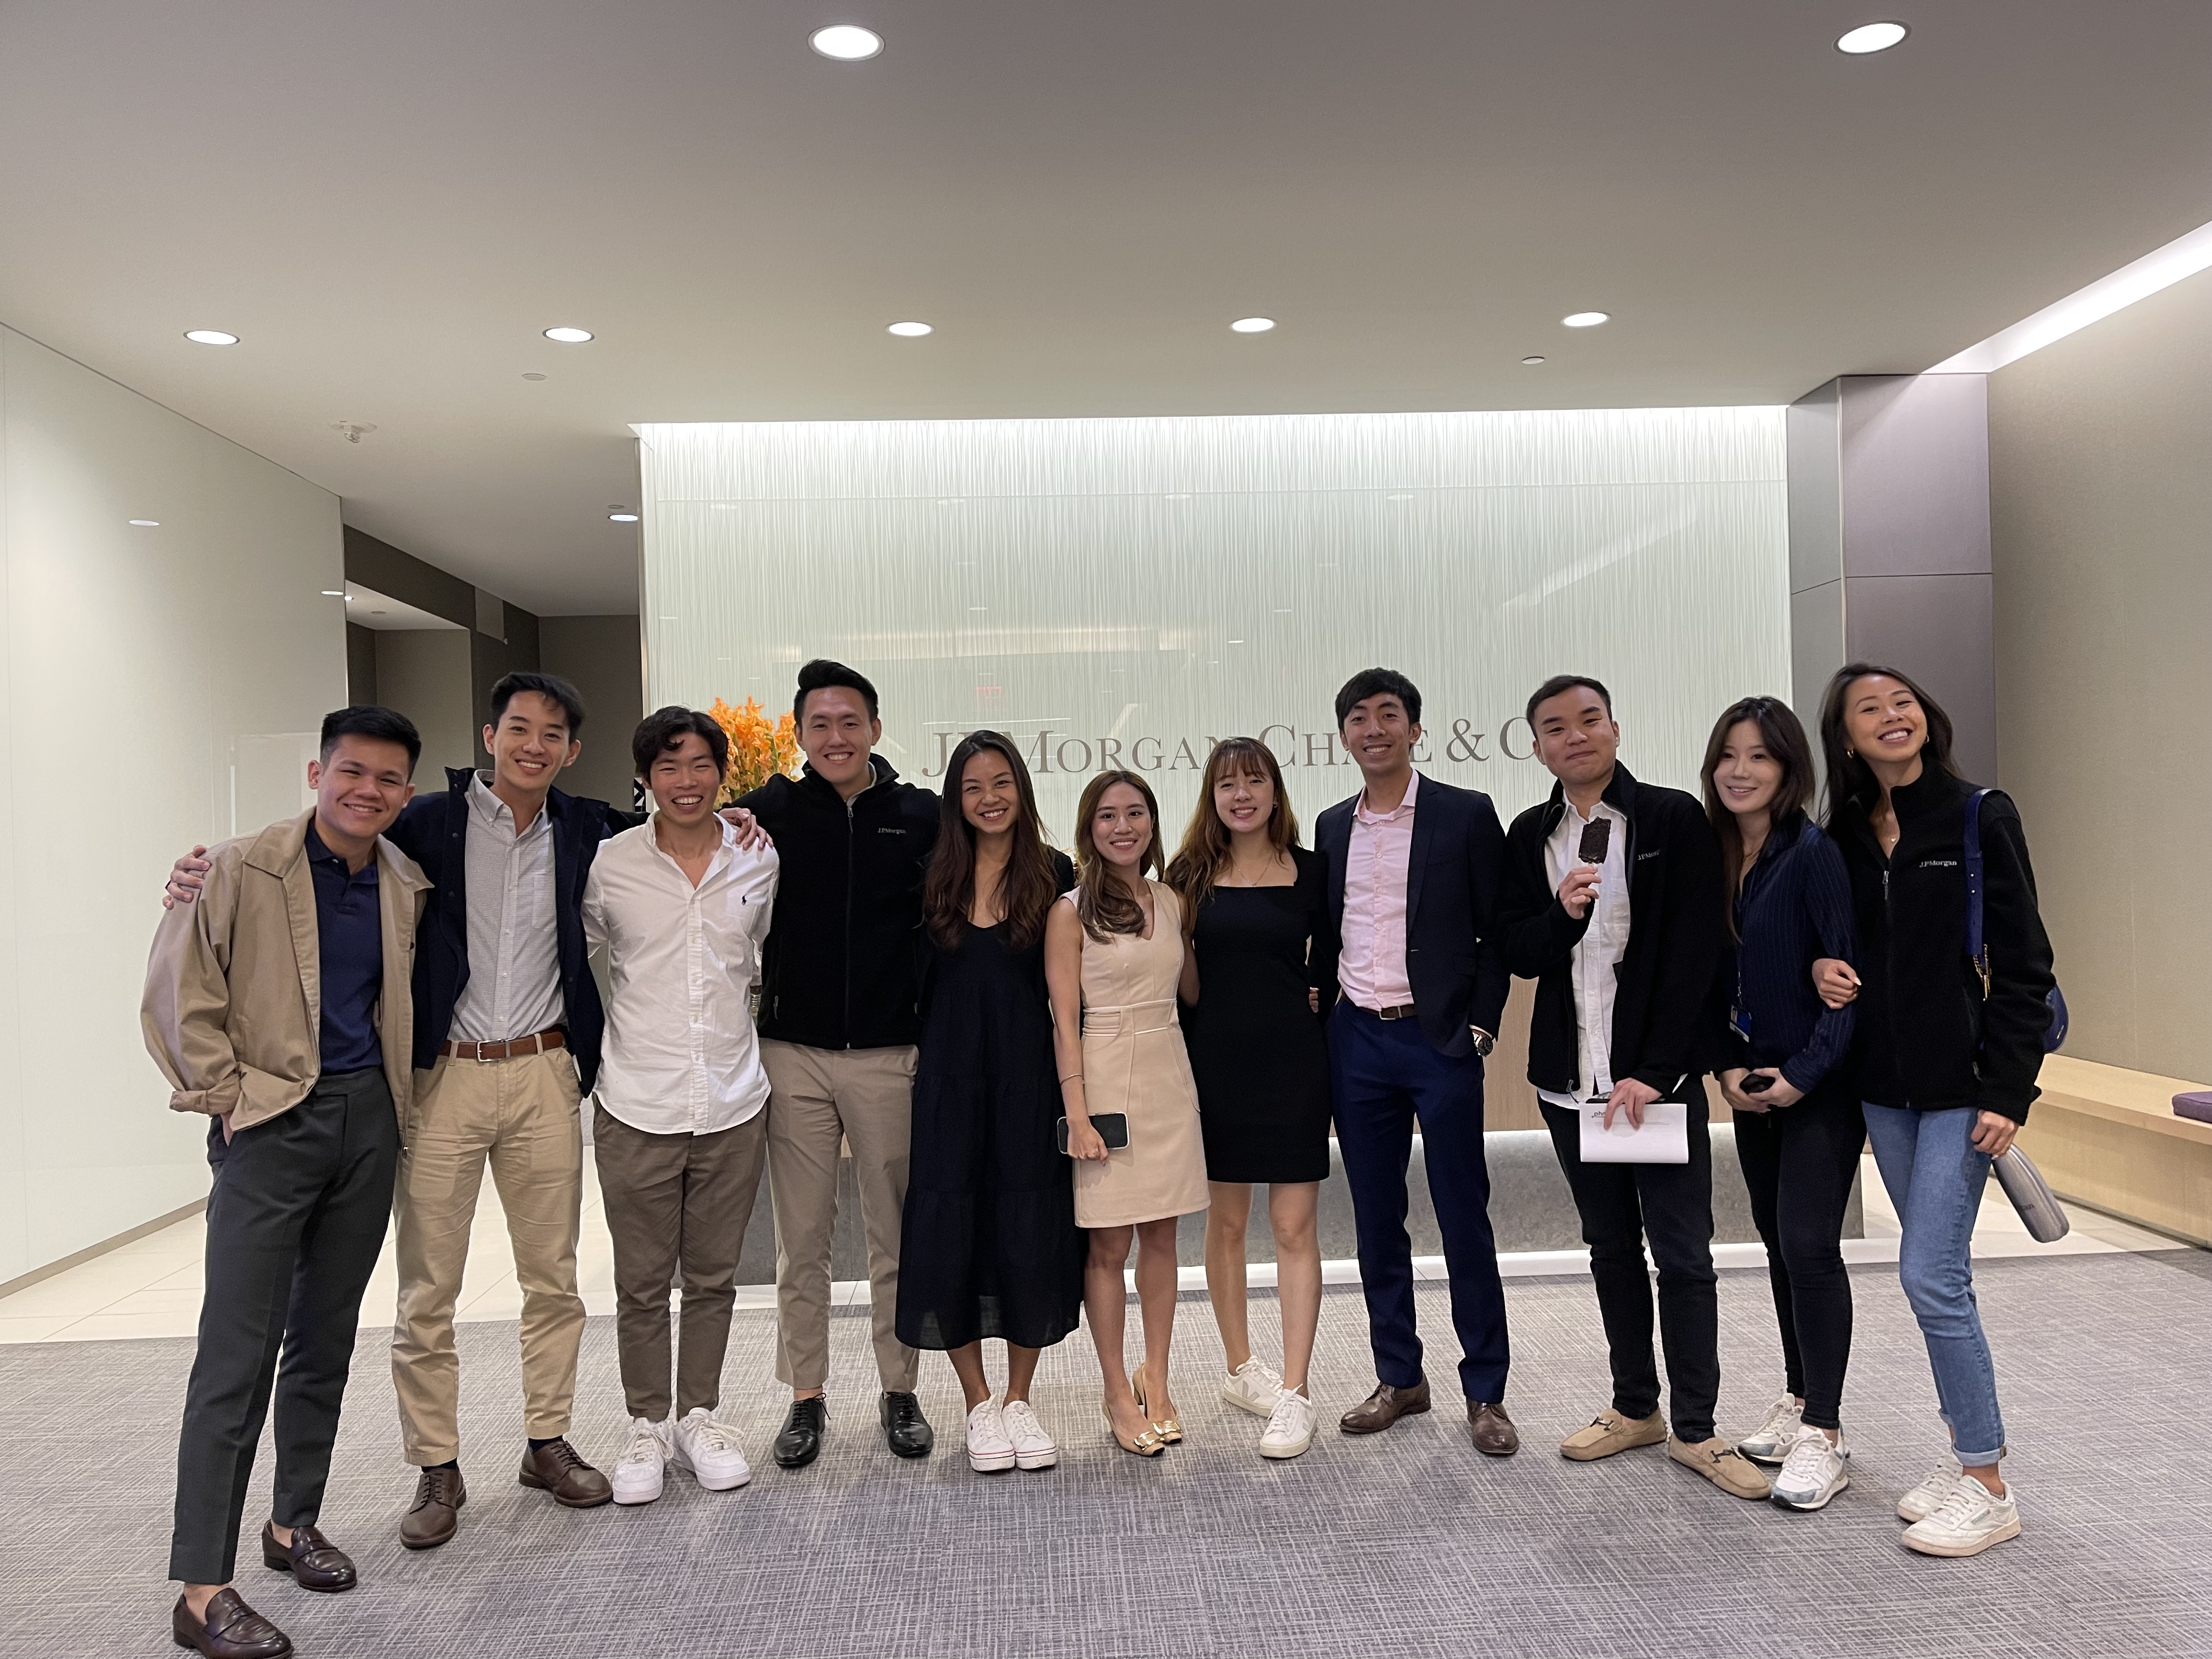 Anson Wong (fifth from the right) was offered a job by J.P. Morgan Asset Management after a successful summer internship.